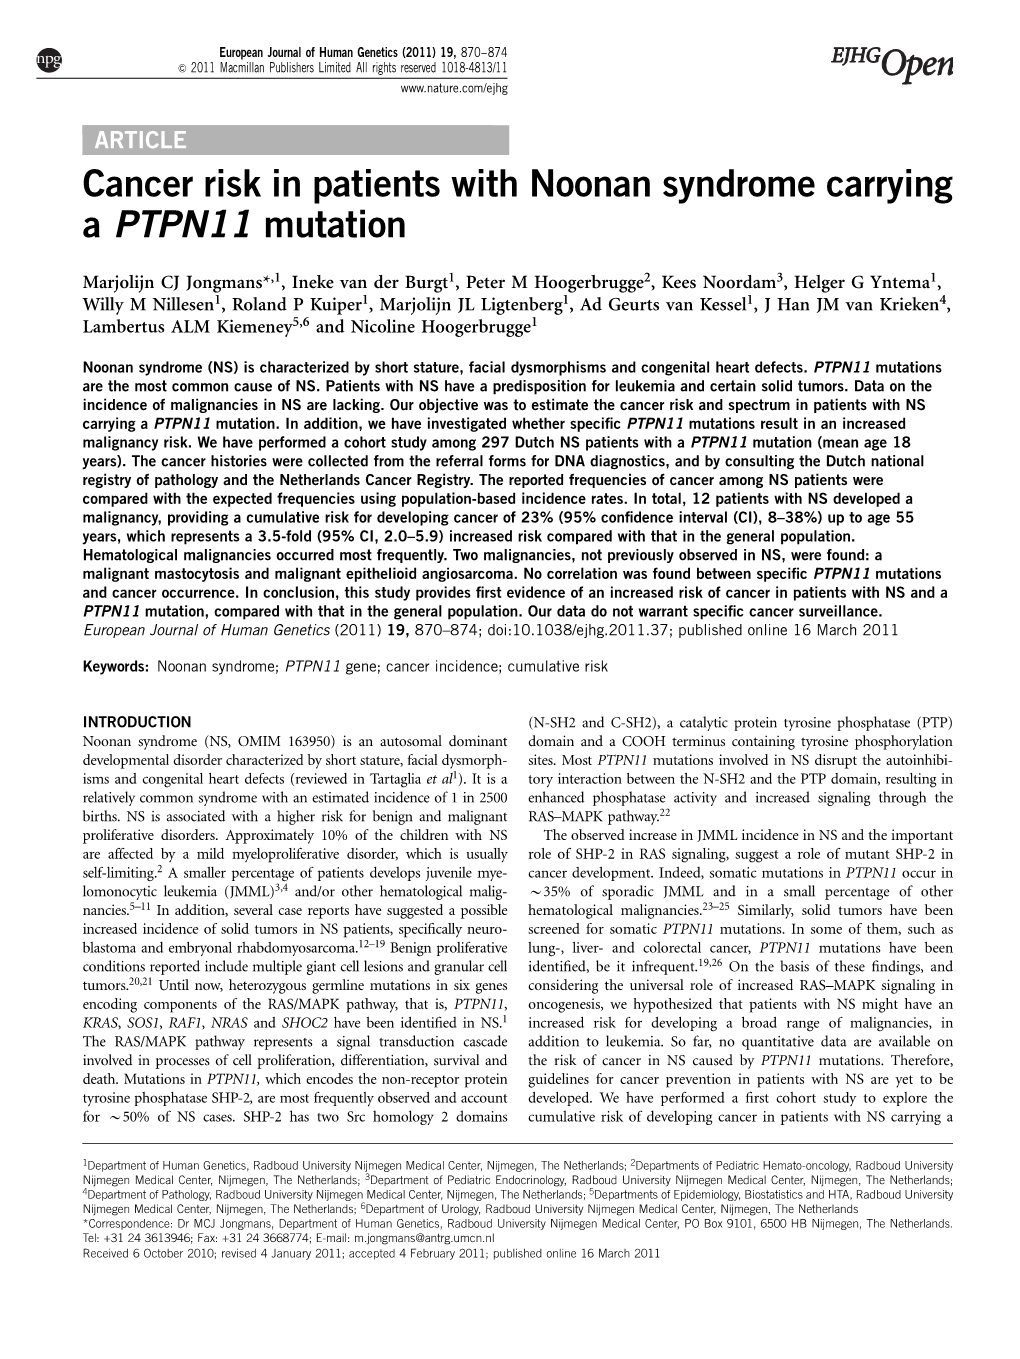 Cancer Risk in Patients with Noonan Syndrome Carrying a PTPN11 Mutation